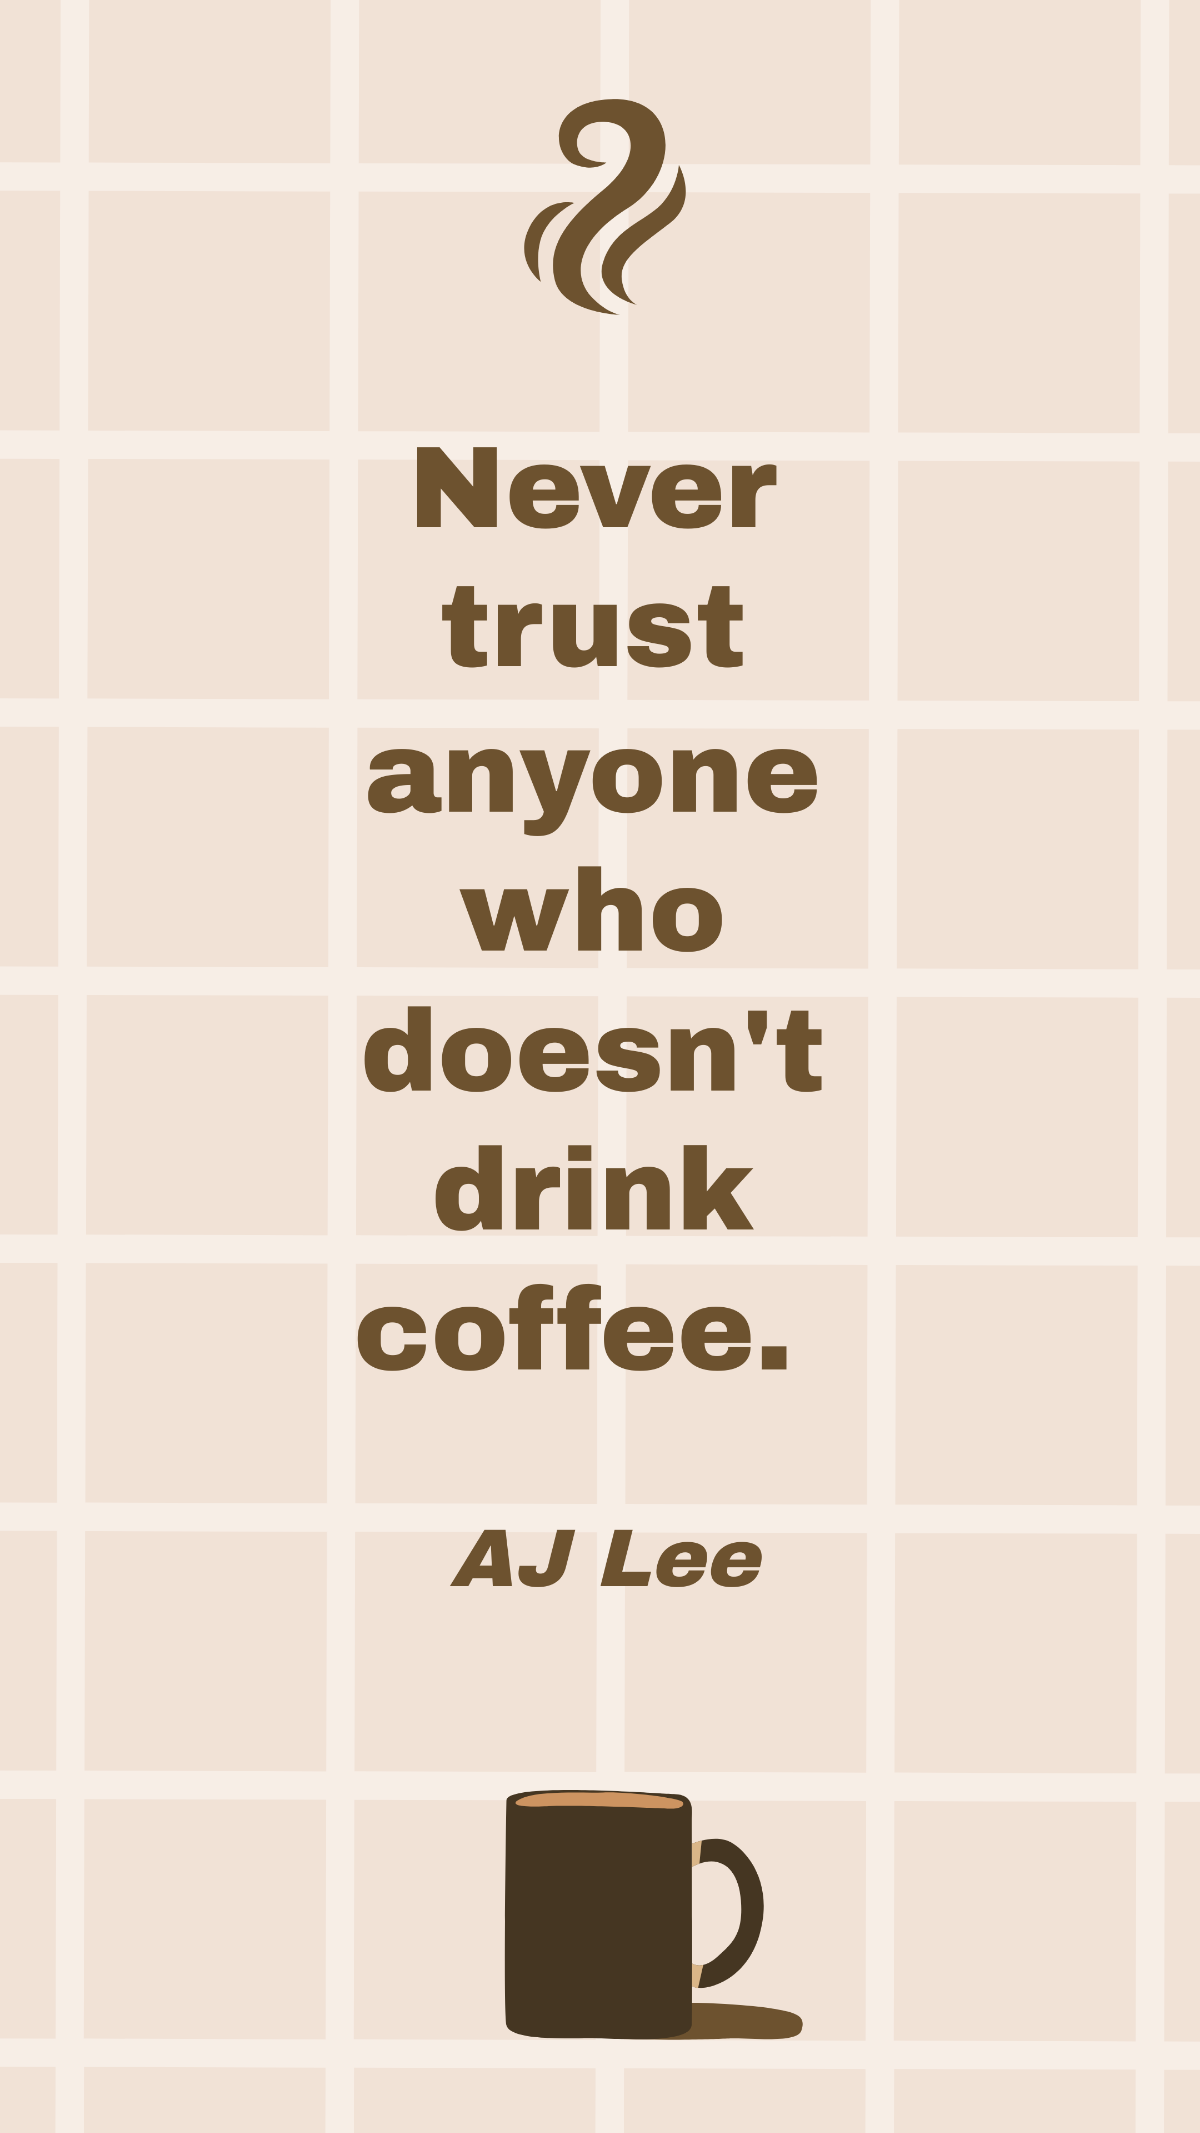 Free AJ Lee - Never trust anyone who doesn't drink coffee. Template